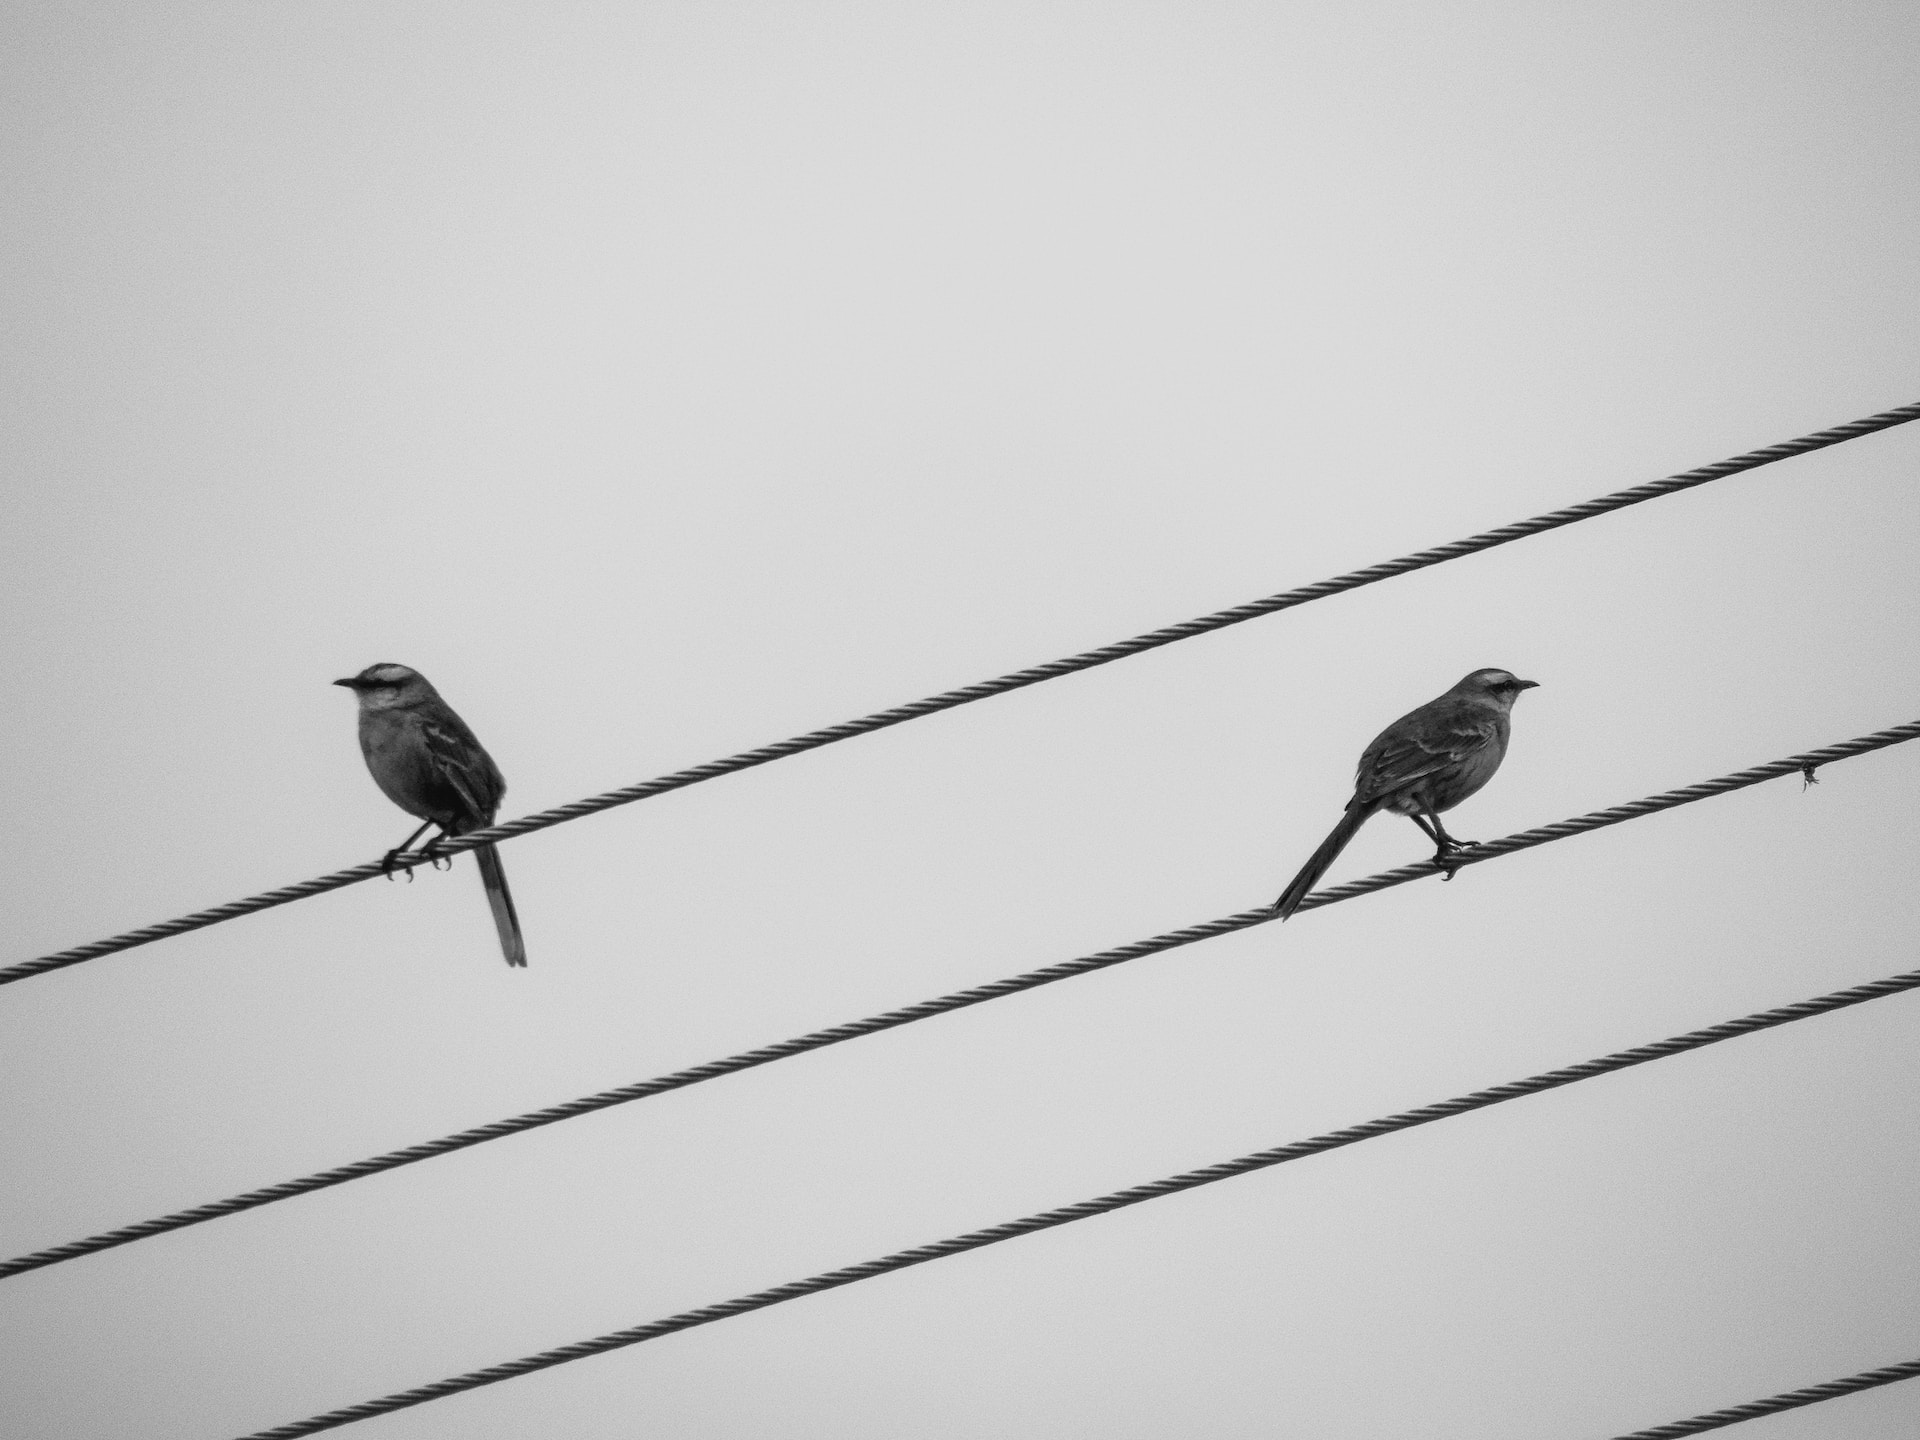 Two sparrows sitting on an electricity cable